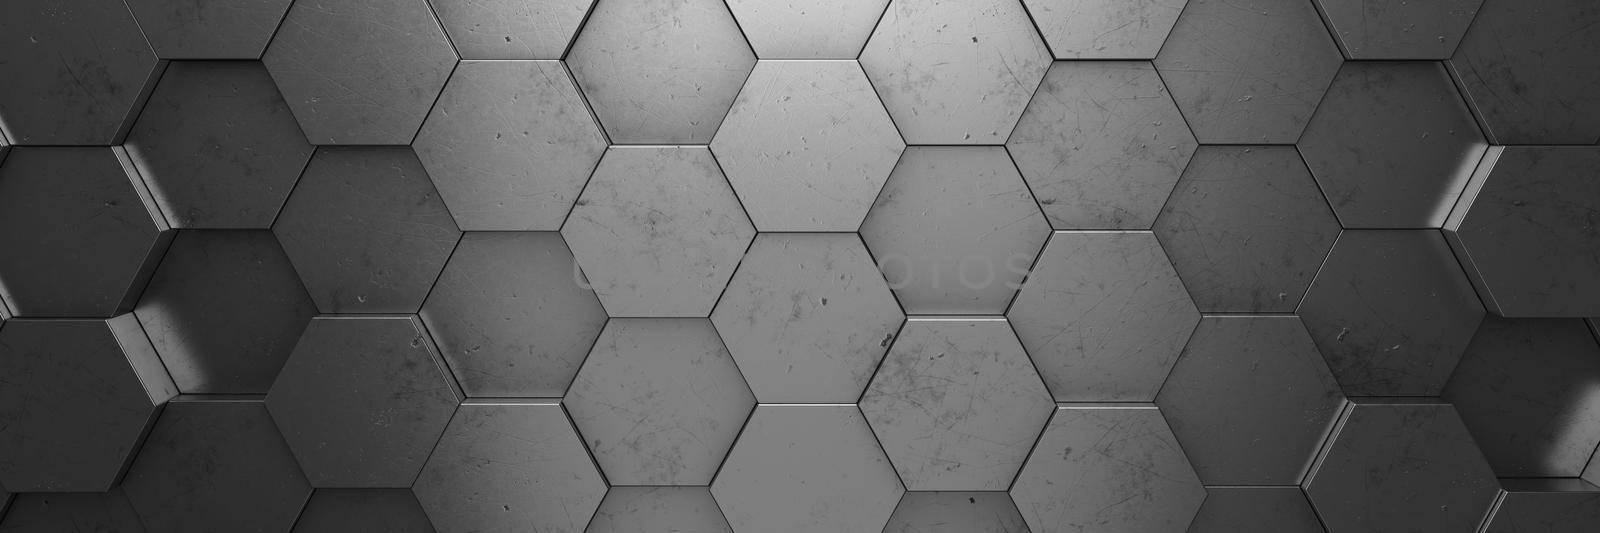 Futuristic and technological hexagonal background. 3d rendering by Taut